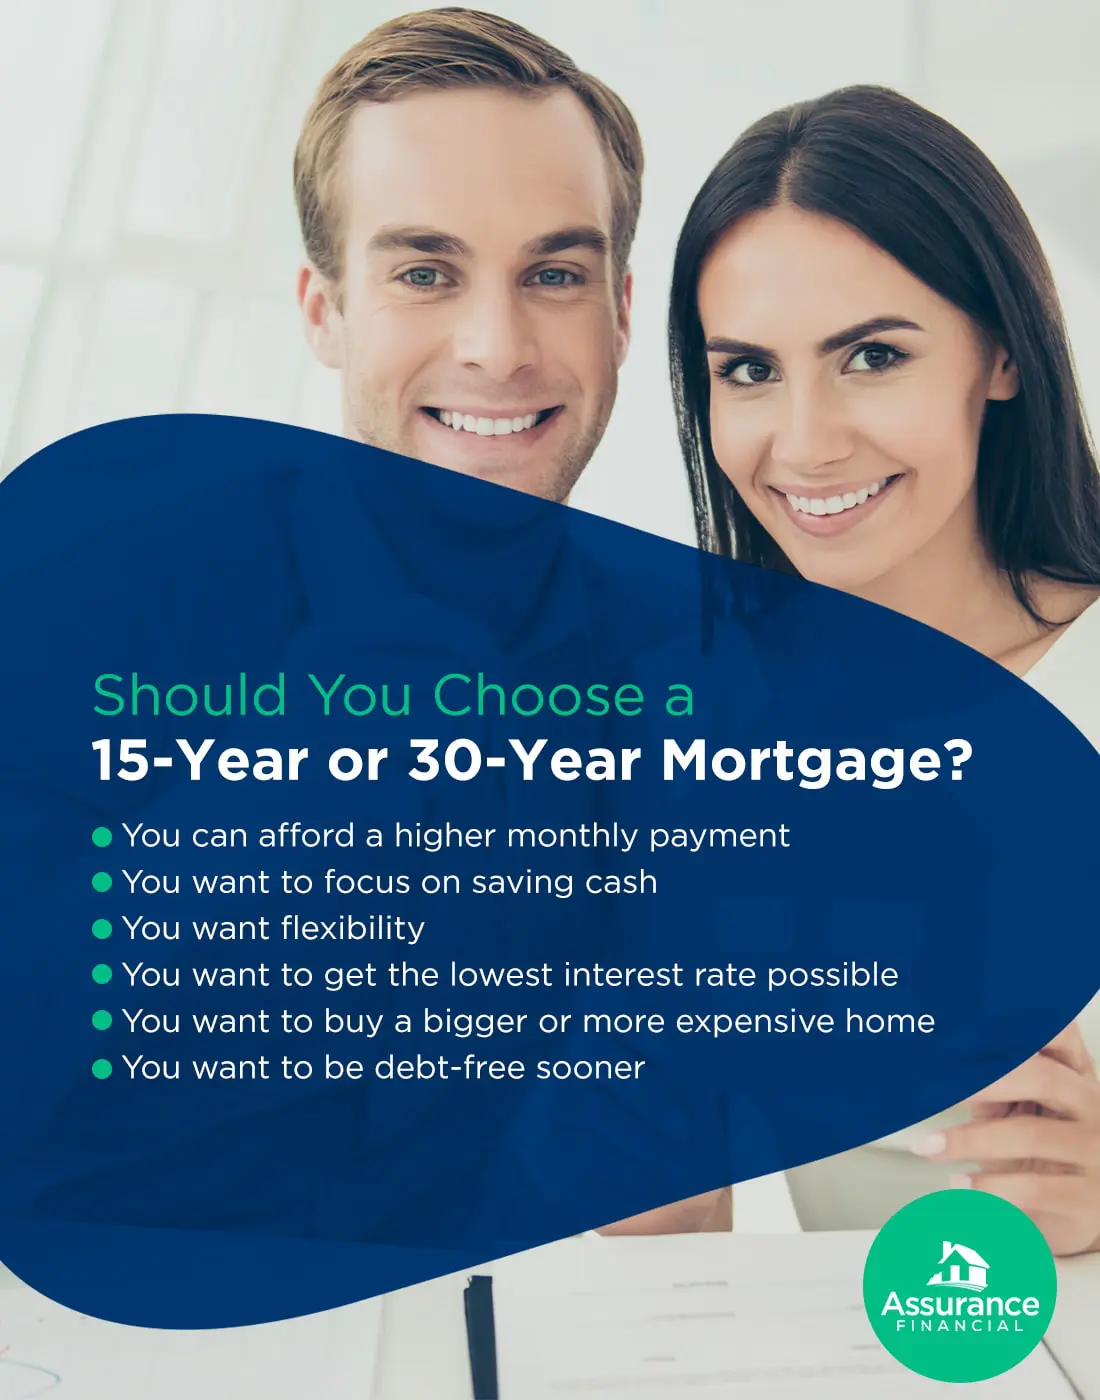 Should You Choose a 15-Year or 30-Year Mortgage infographic